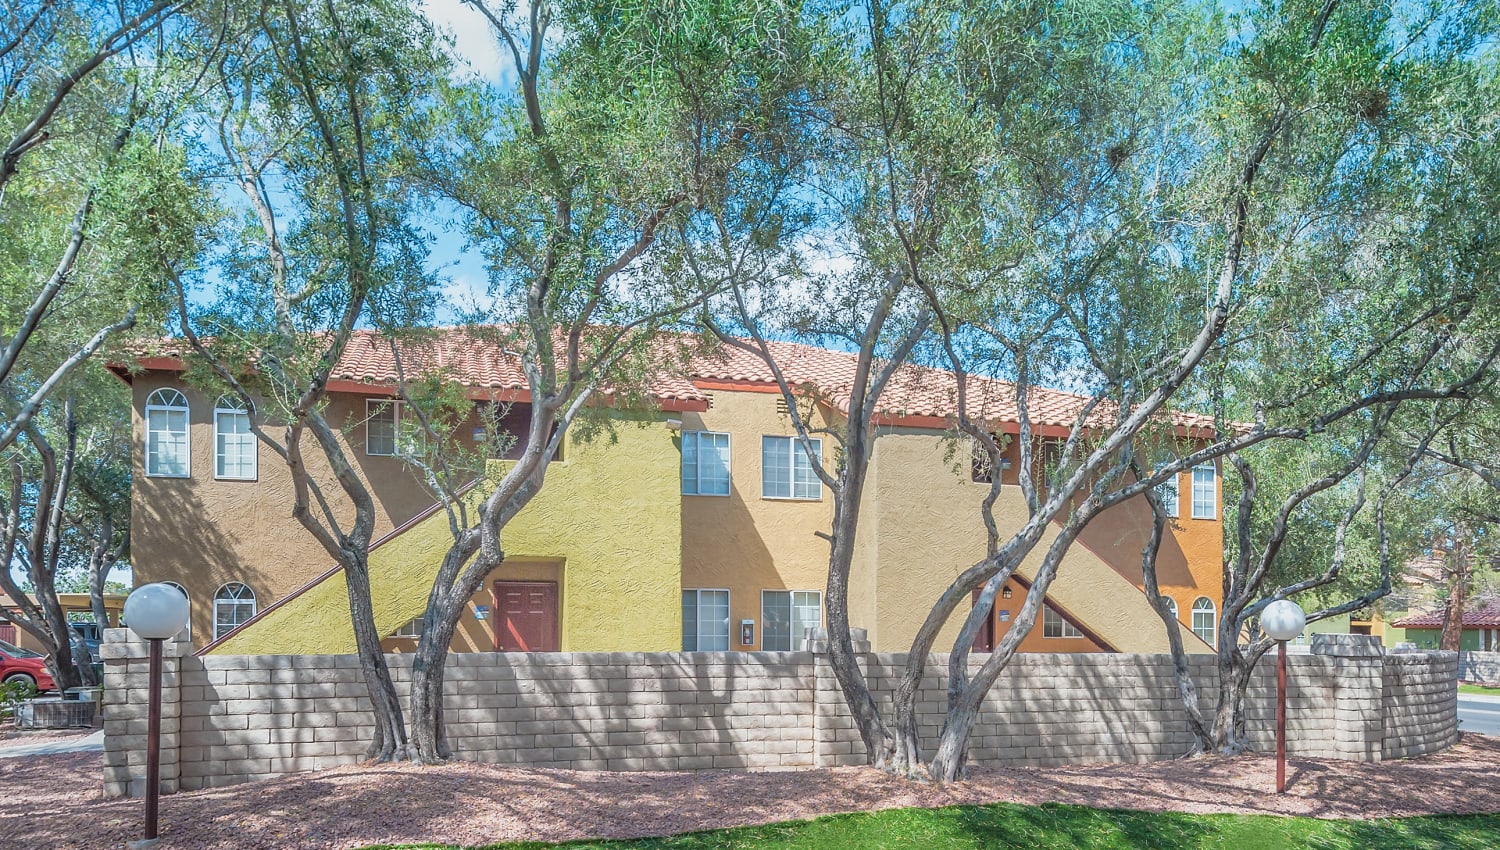 Exterior view and foliage at Hidden Cove Apartments in Las Vegas, Nevada